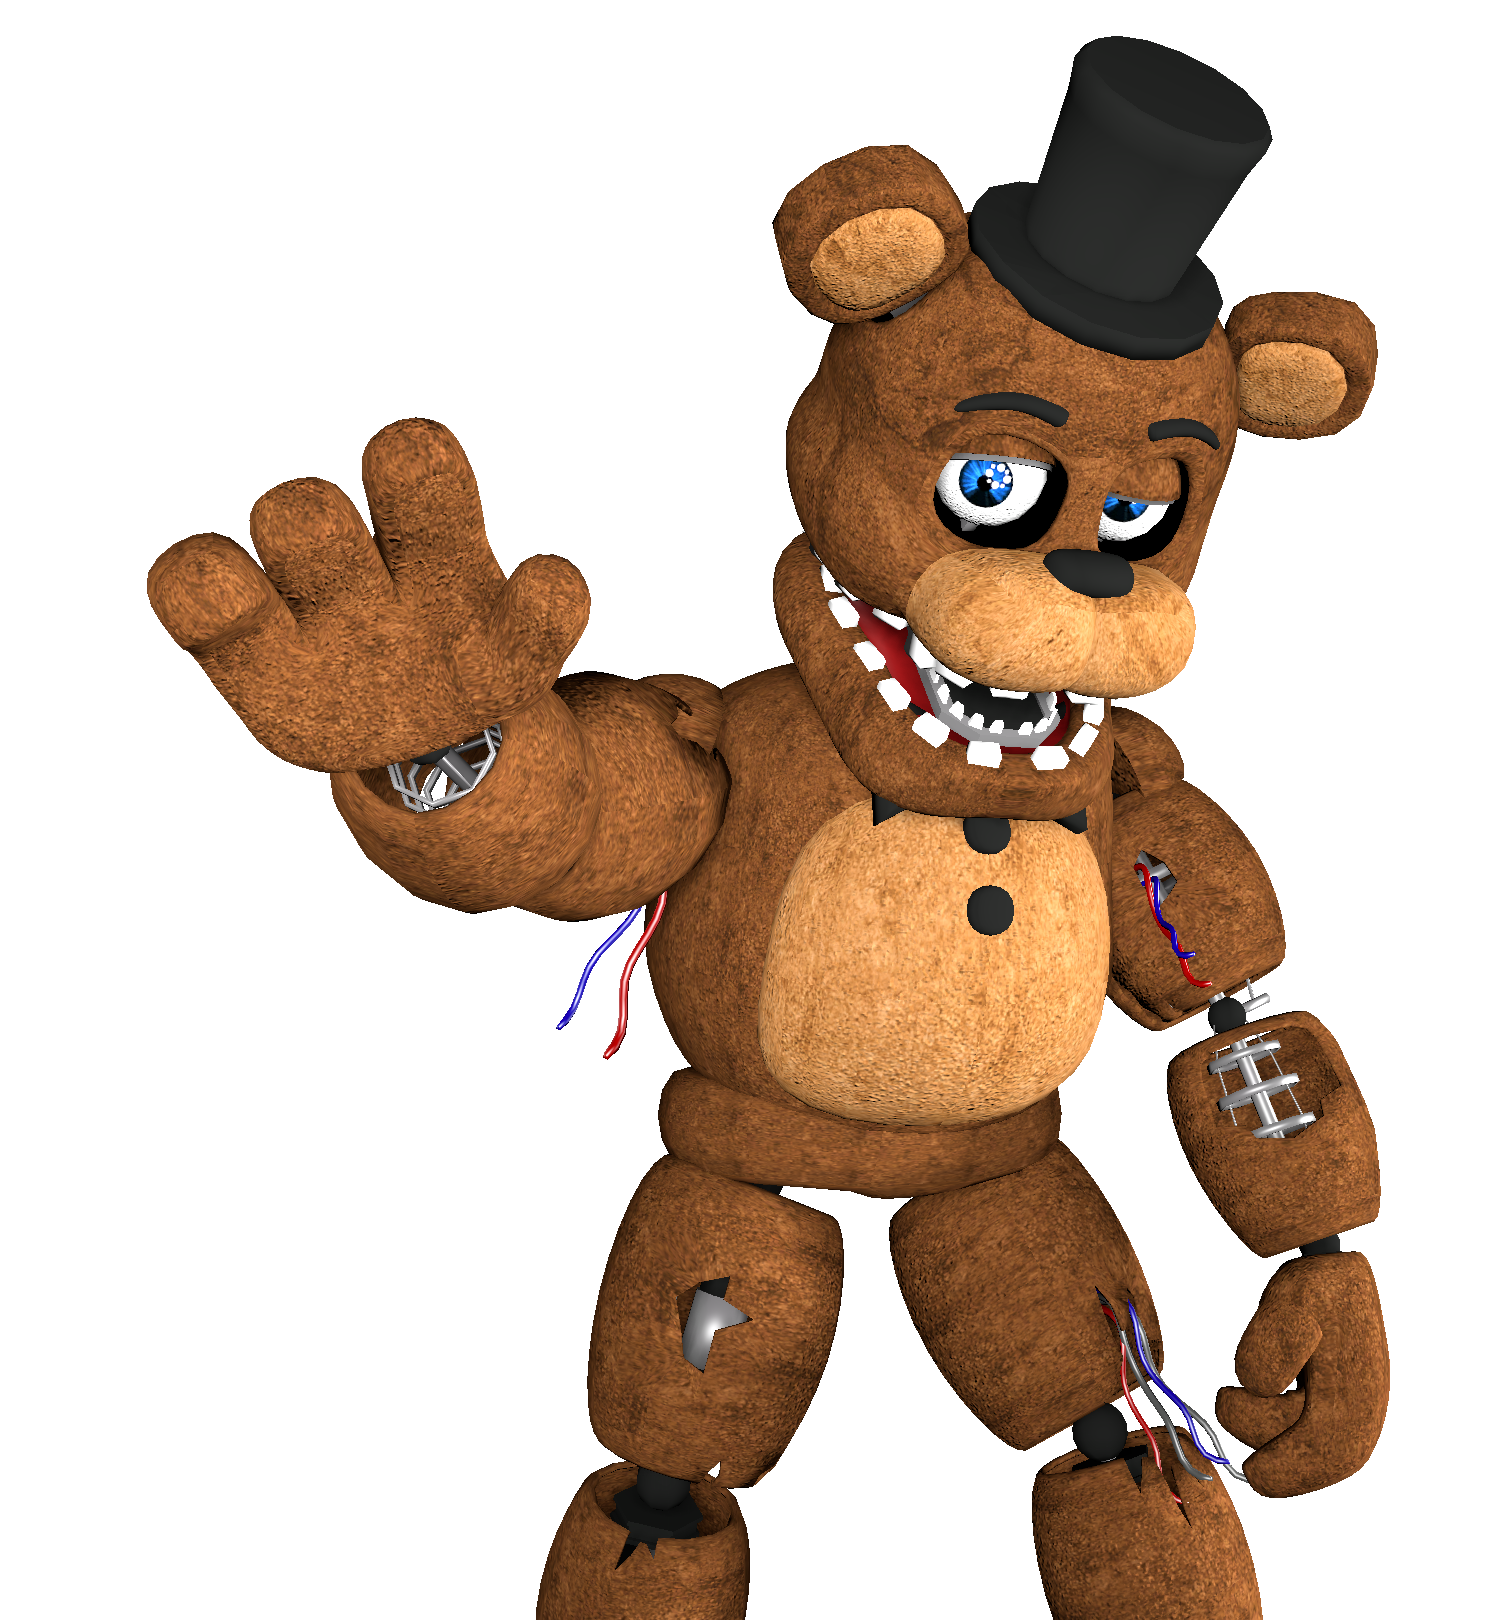 Withered Freddy 